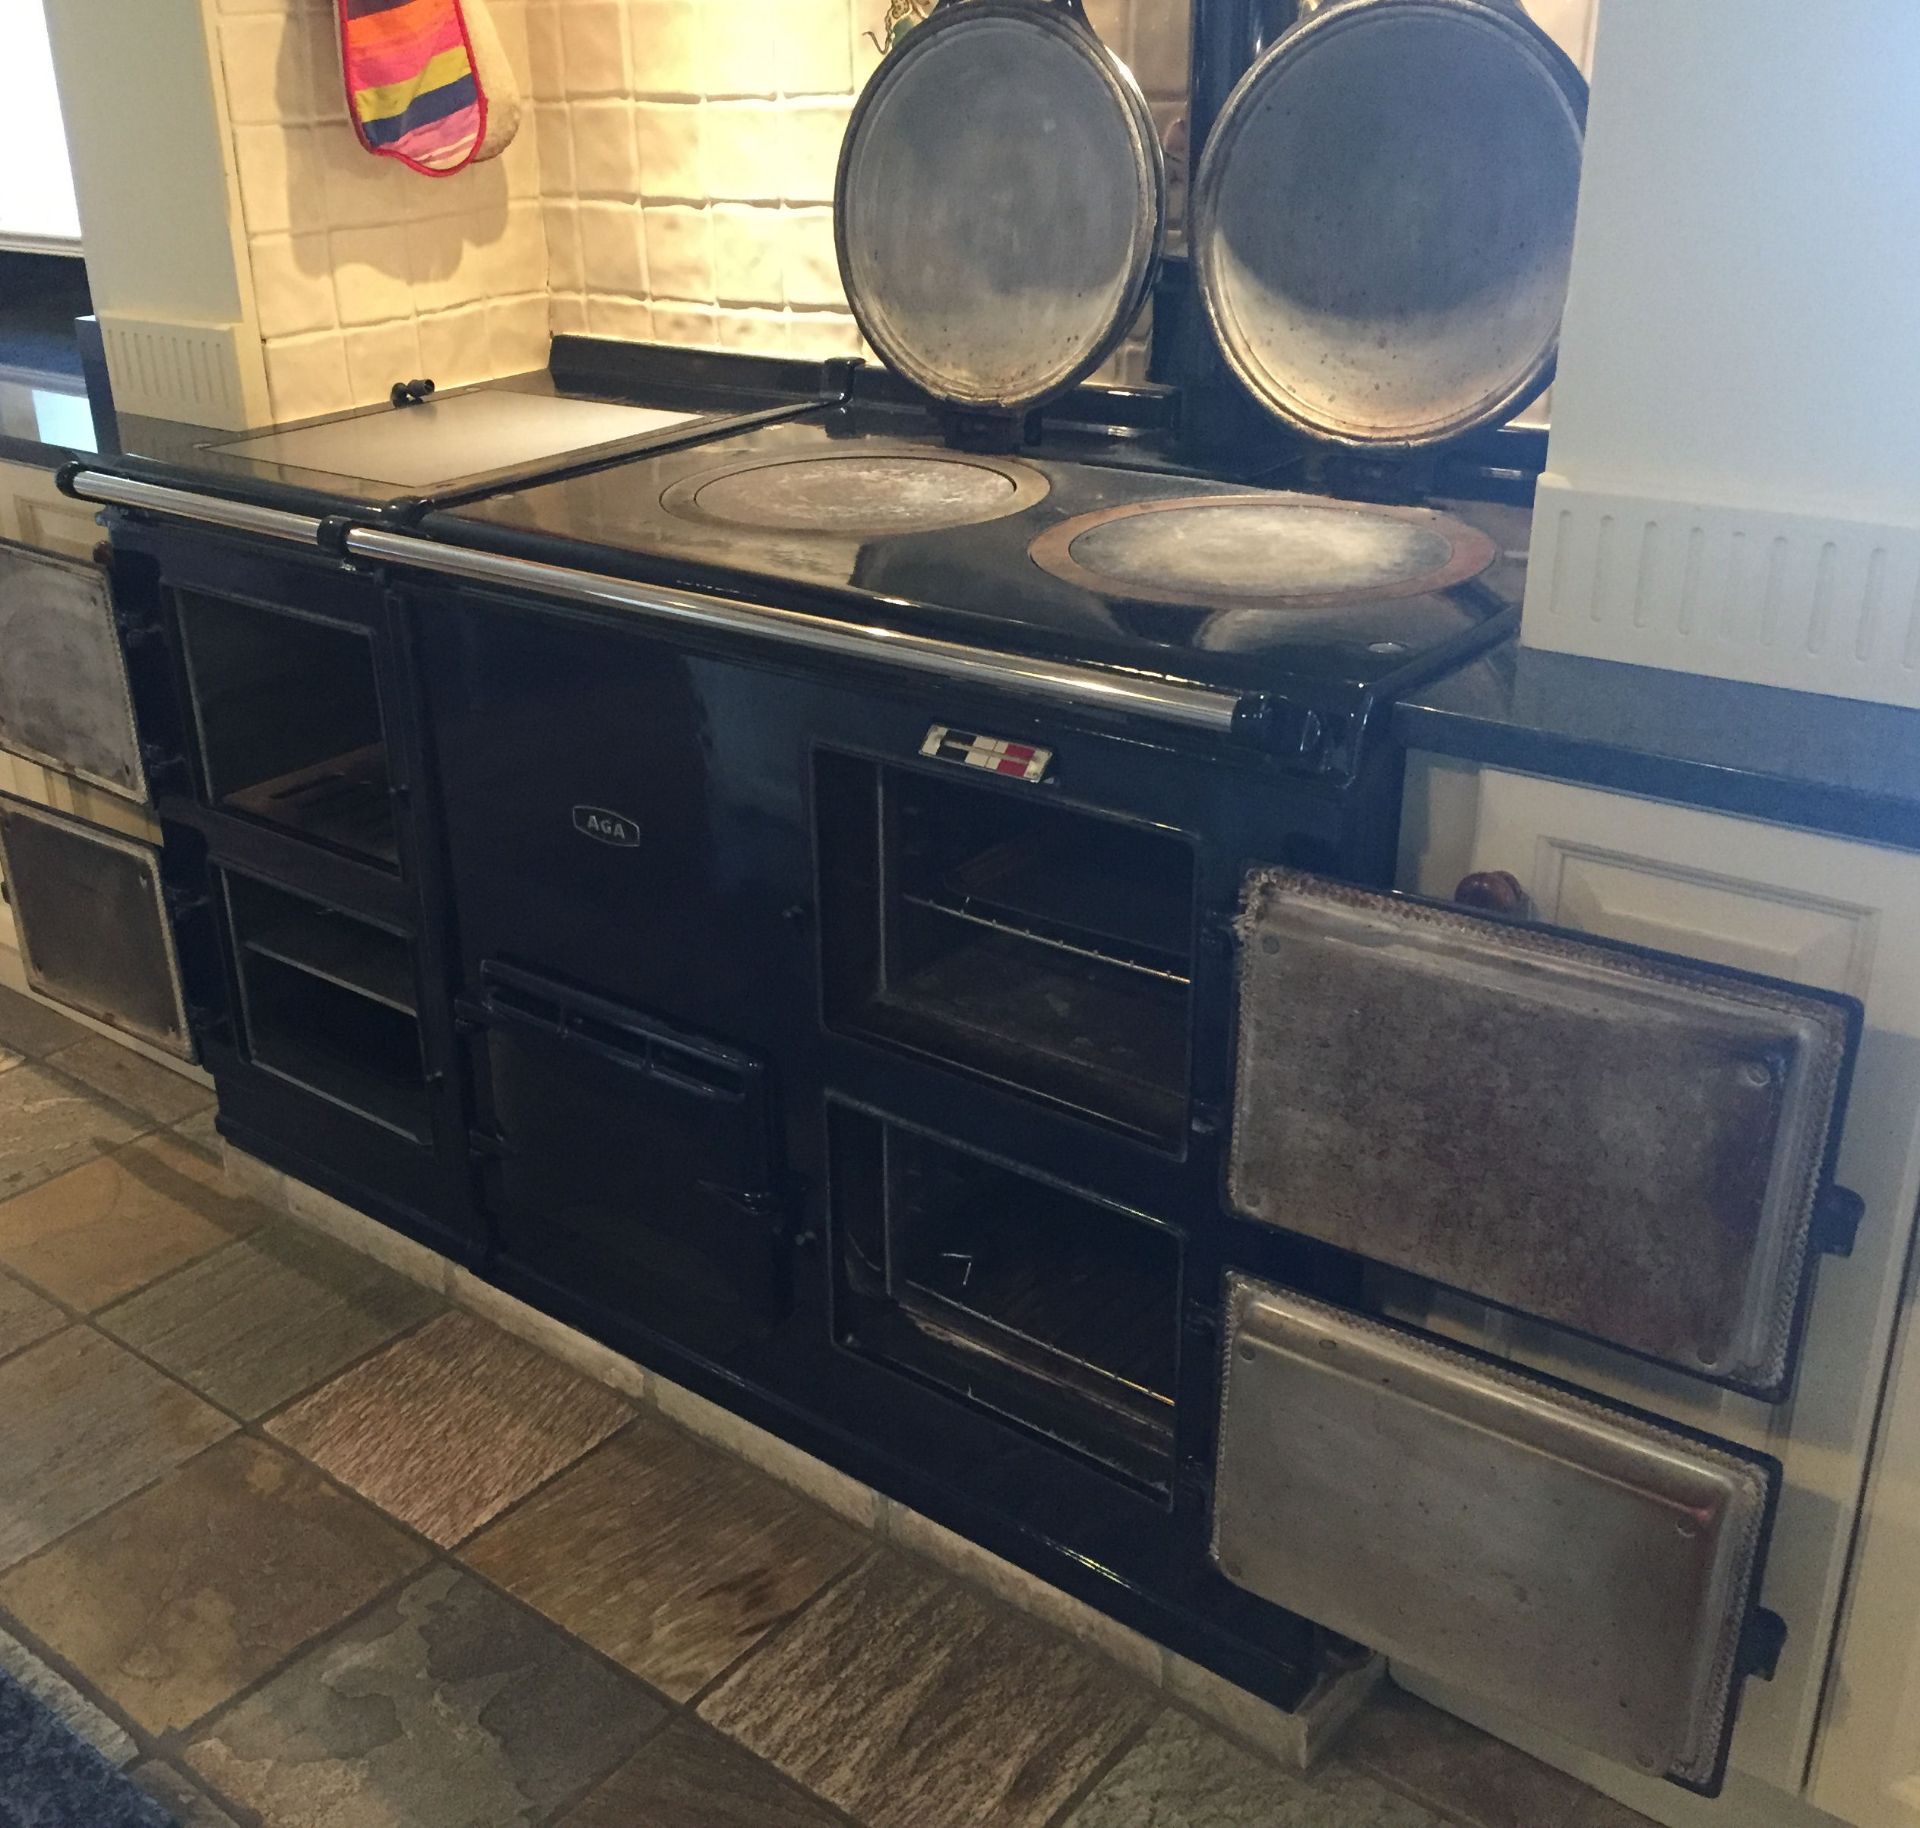 1 x Aga 4-Oven, 3-Plate Dual-Fuel Range Cooker - Cast Iron With Navy Enamel Finish With A Black Top - Image 16 of 21